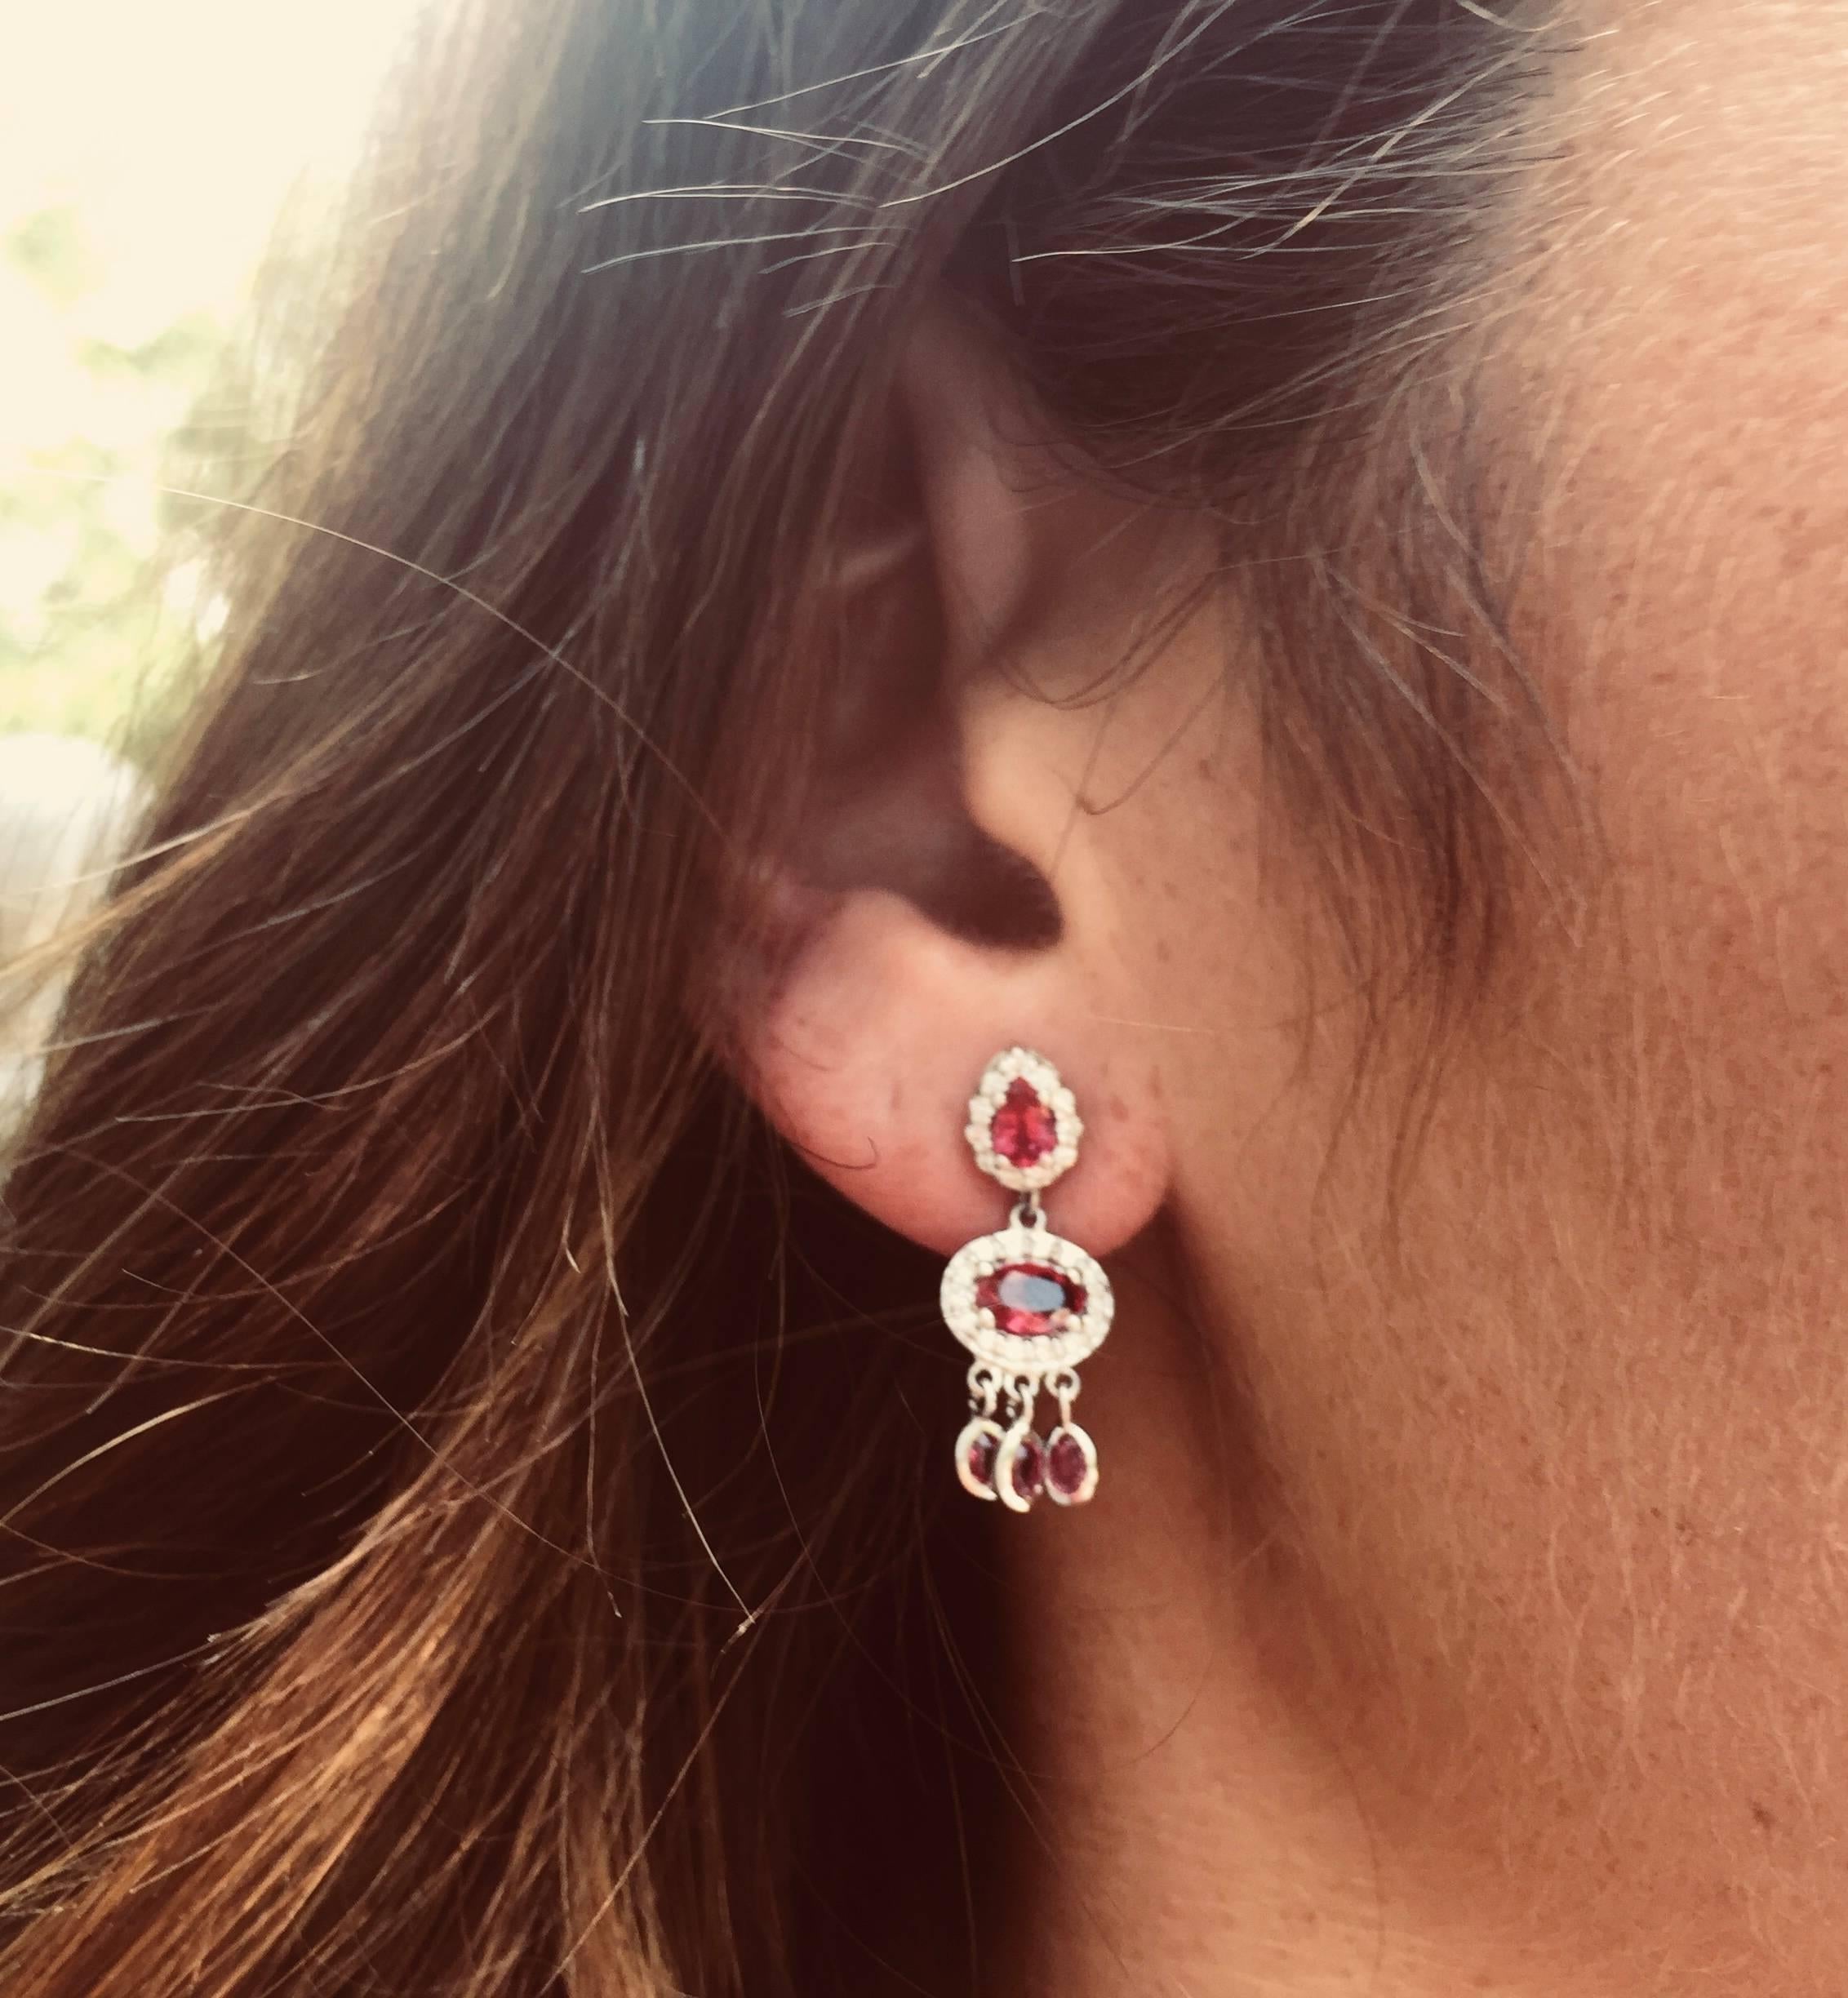 Featuring 18k white gold drop earrings 
Halo pear shape and oval shape ruby weighing 3.00 carat 
Cluster diamond weighing 1.05 carat 
New Earrings
Handmade in USA
18k gold earrings are hanging off a post with push-backs
Ruby has a rainbow of color